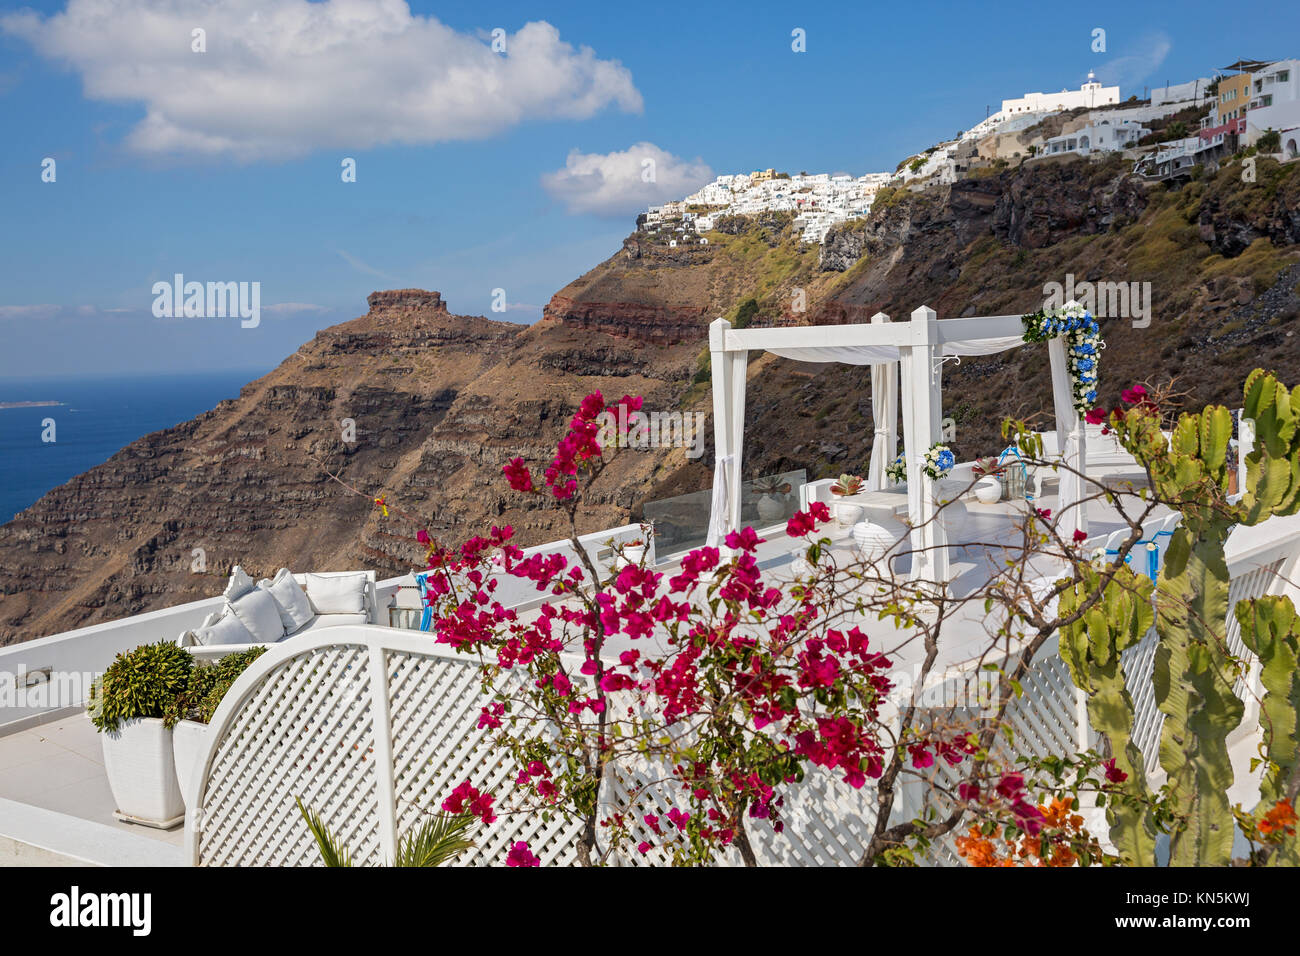 Decorations for wedding ceremony on the background of mountains and sea, Greece Stock Photo